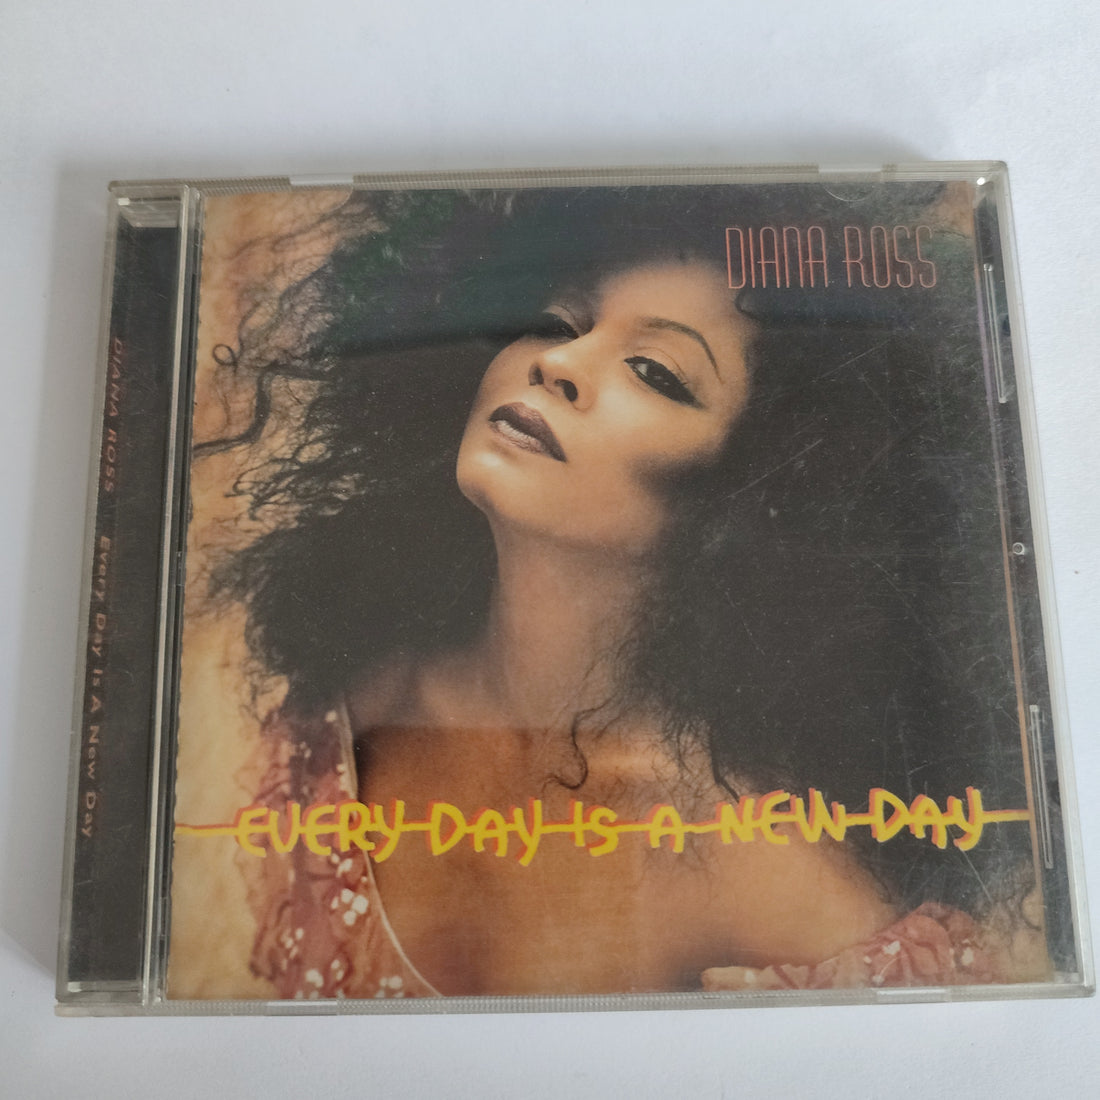 Diana Ross - Every Day Is A New Day (CD) (VG+)